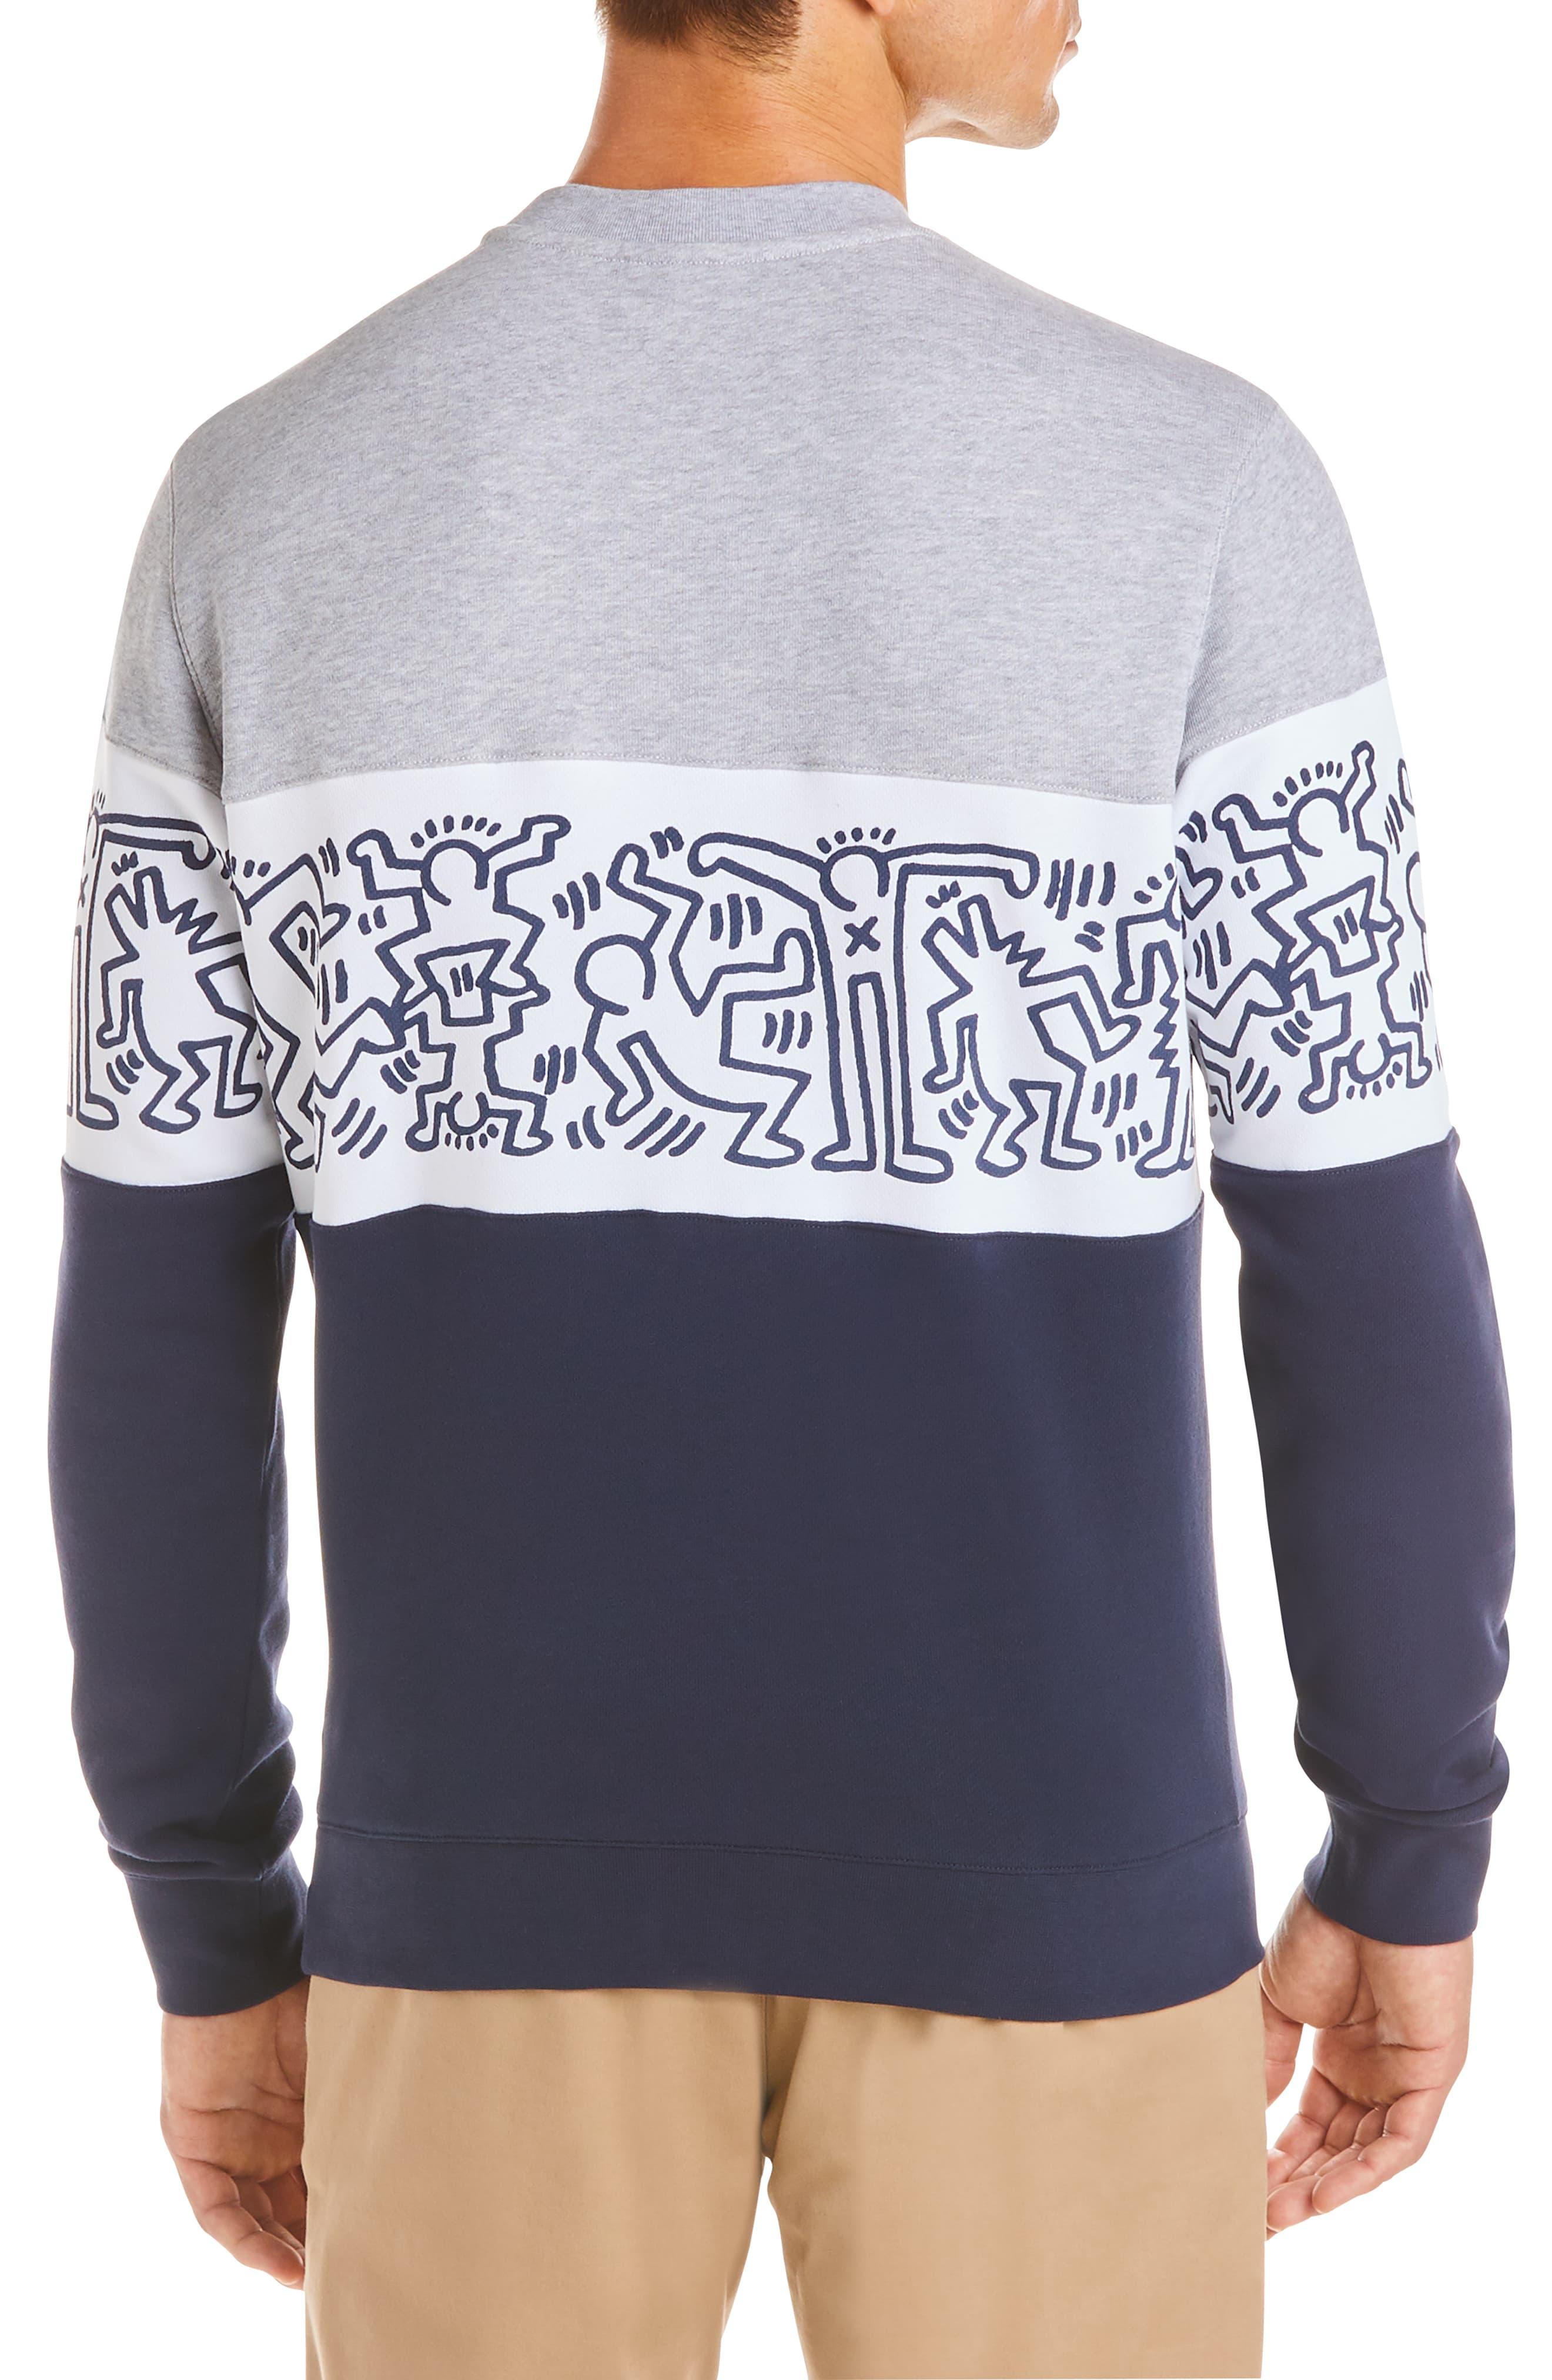 lacoste keith haring shirt